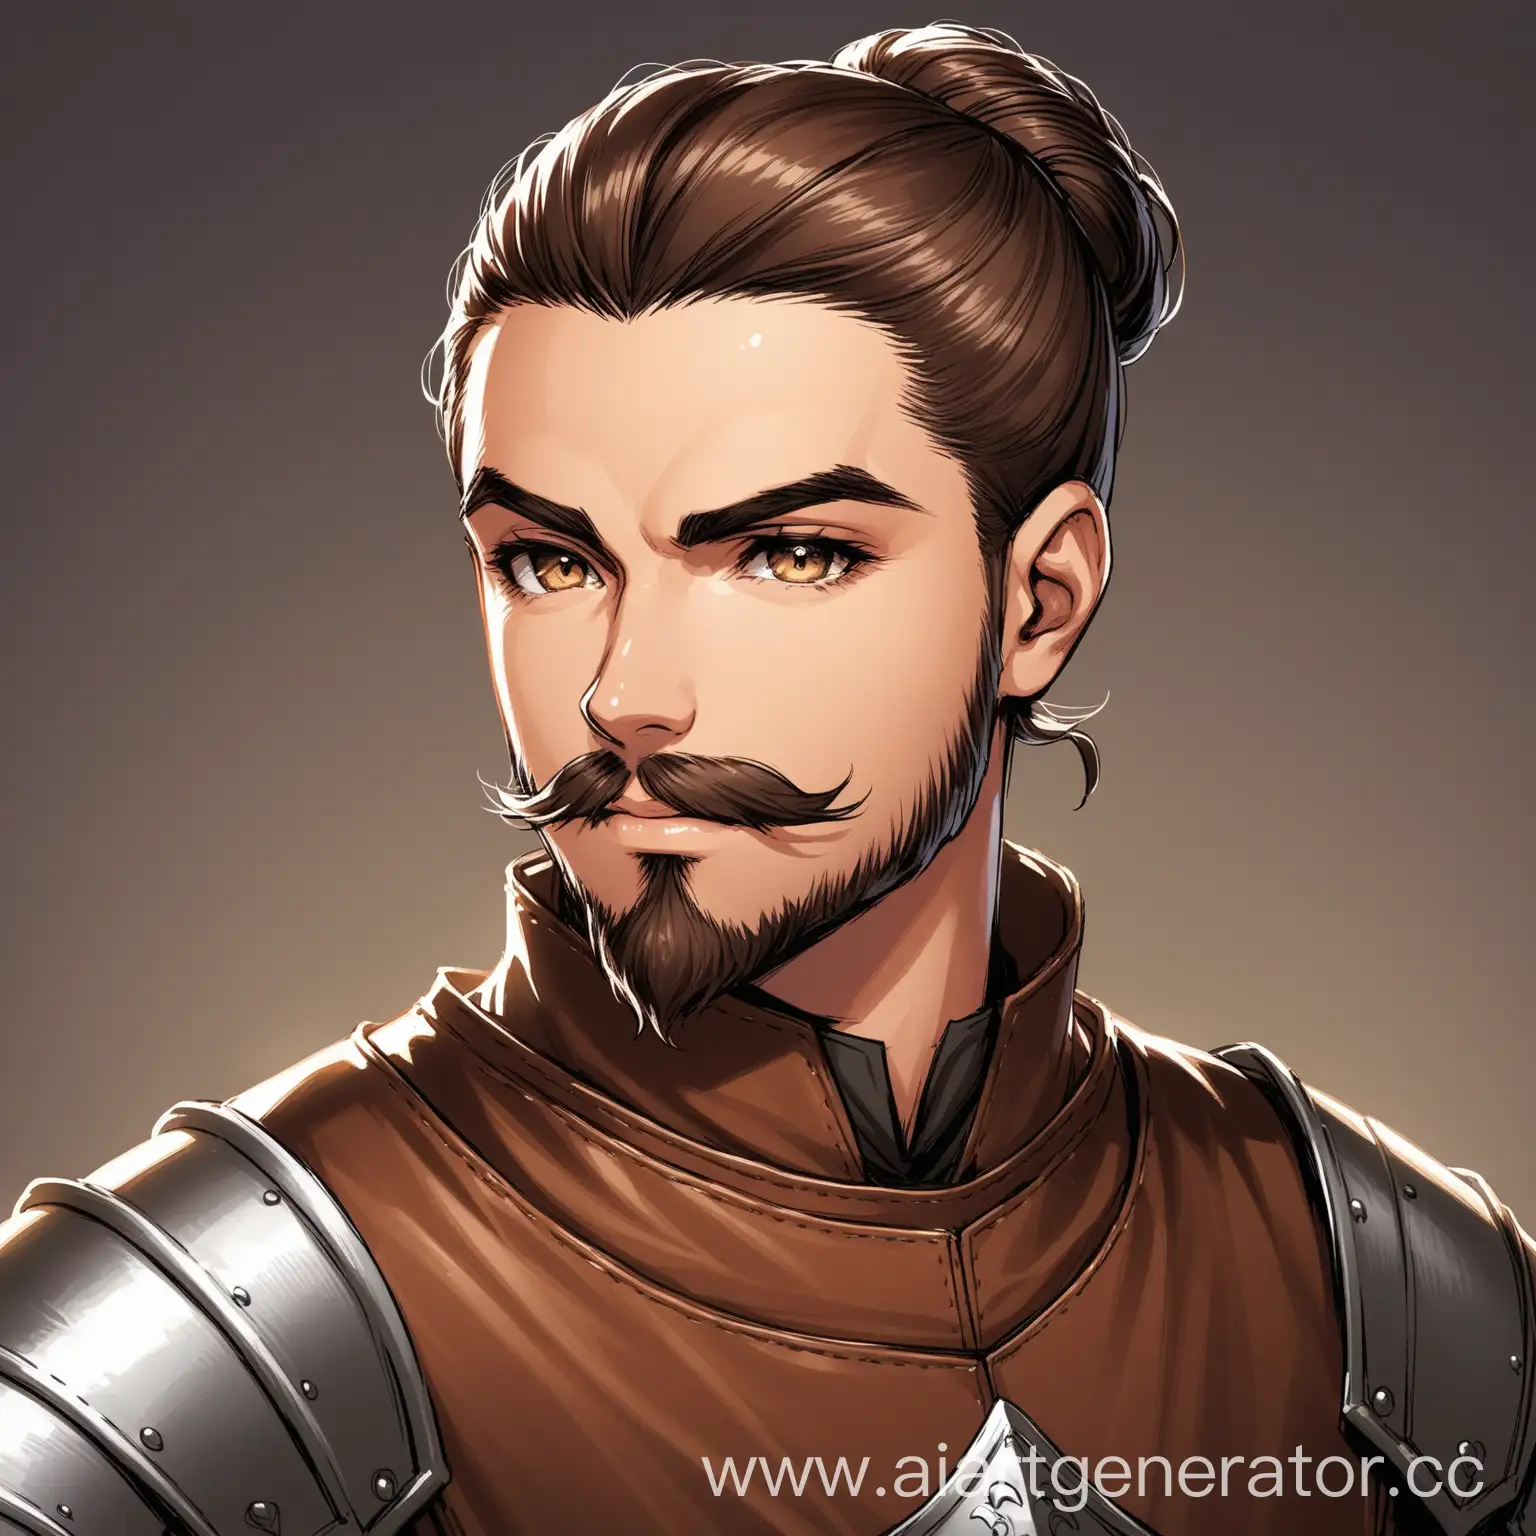 Medieval-Warrior-with-Leather-Armor-and-Man-Bun-Hairstyle